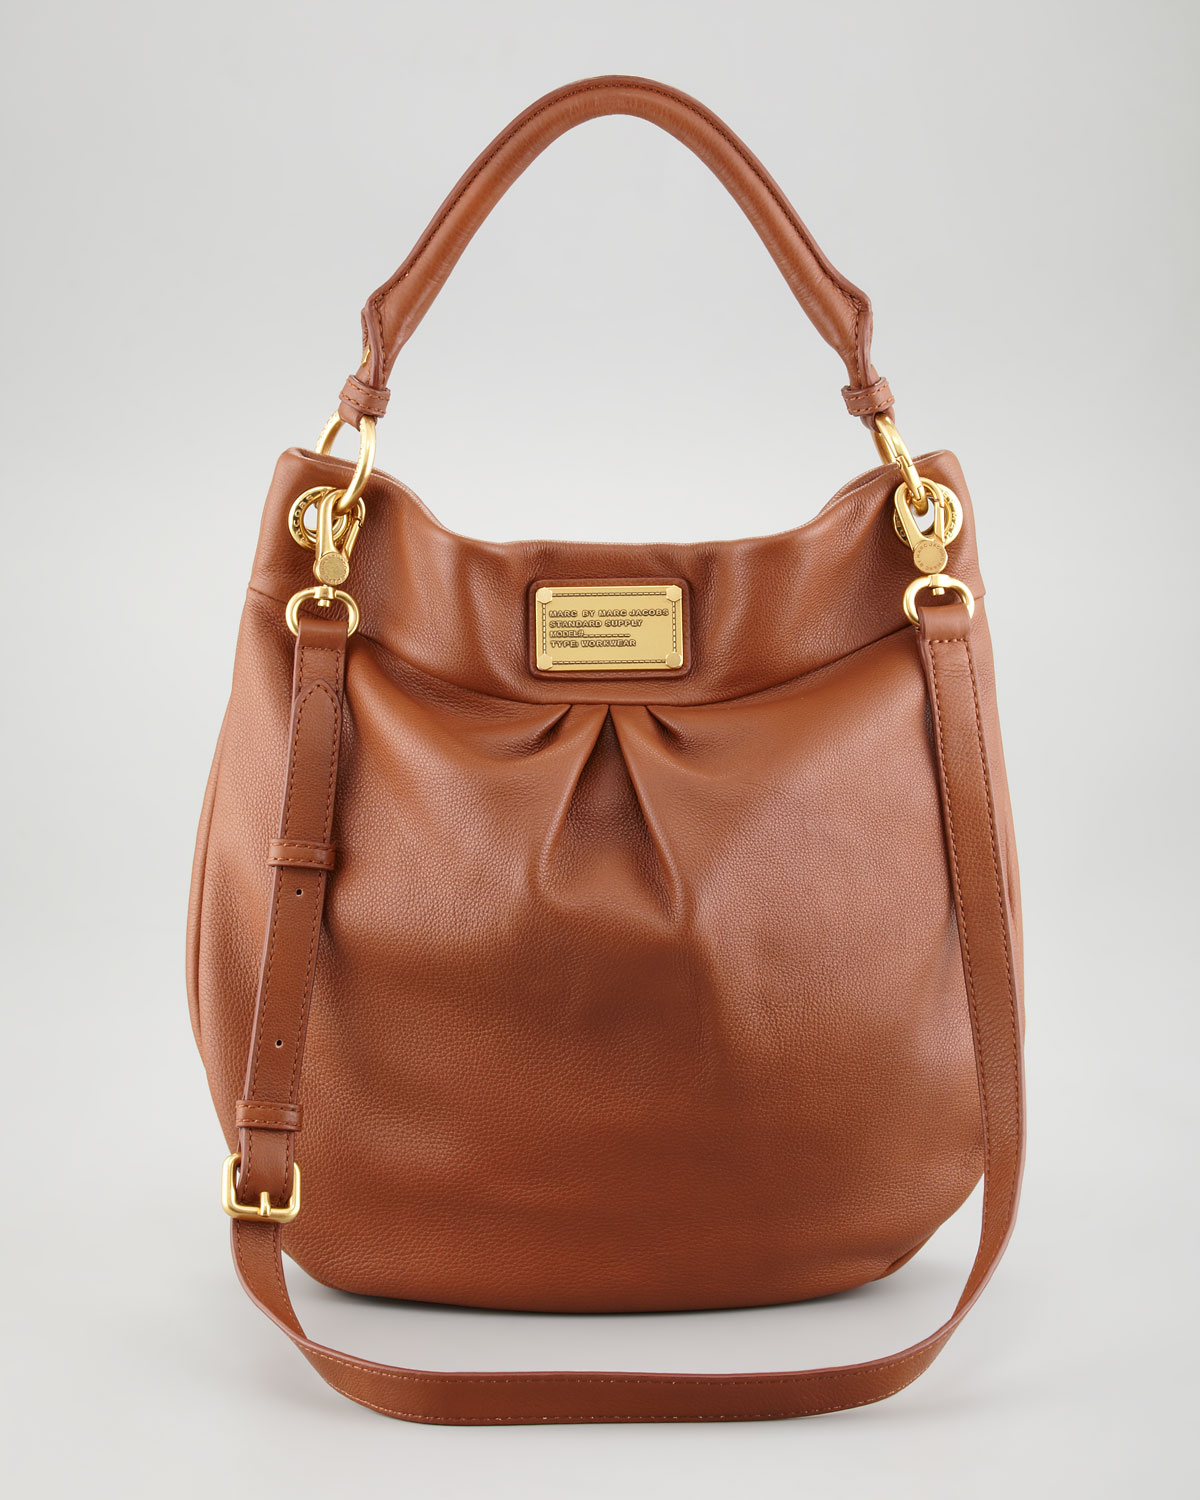 Marc By Marc Jacobs Classic Q Hillier Hobo Bag in Brown - Lyst